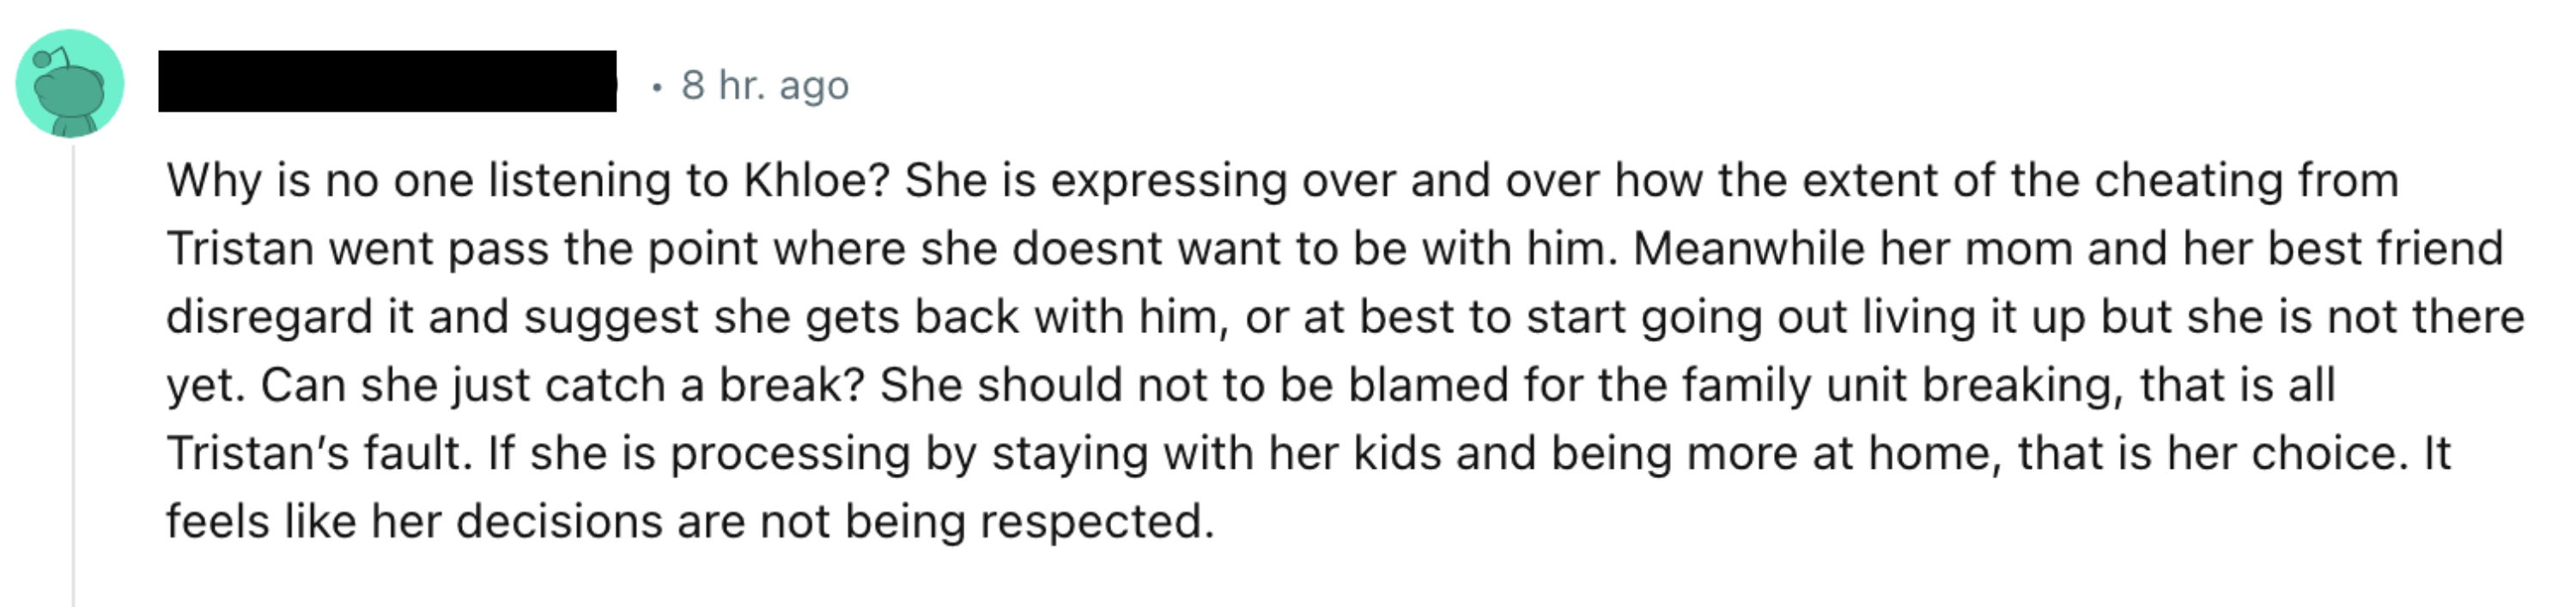 Screenshot of the comment, which includes, &quot;She is expressing over and over how the extent of the cheating from Tristan went pass the point where she doesnt want to be with him; meanwhile her mom and her best friend disregard it&quot;